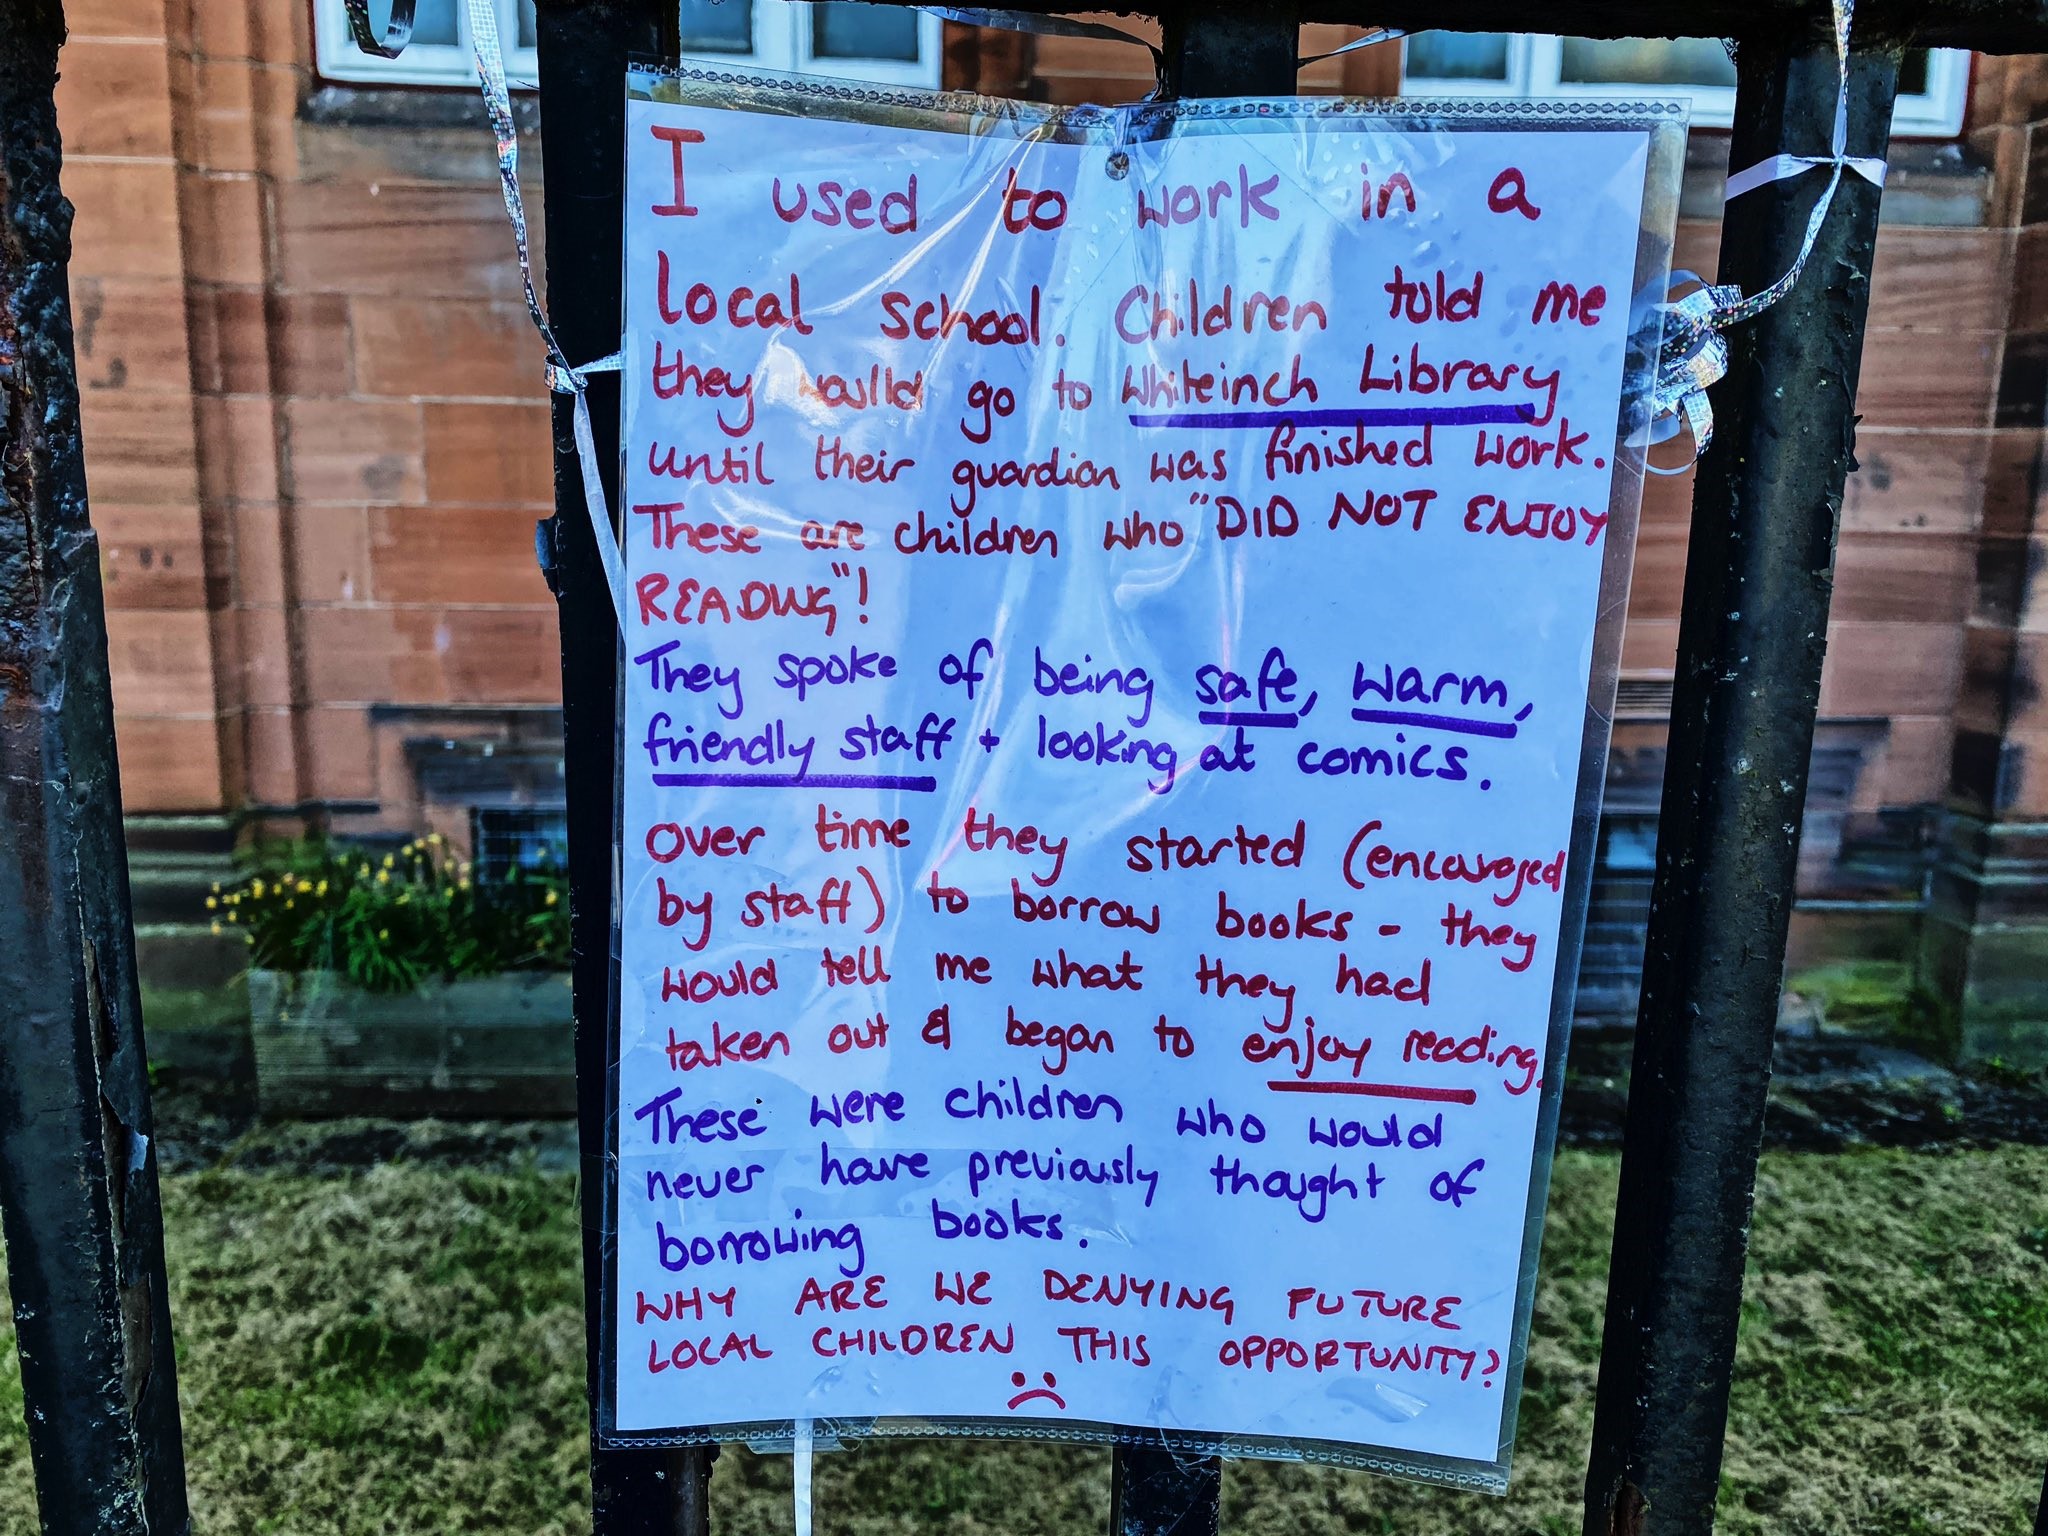 A note hung on railings at Whiteinch Library (Michael Shanks)